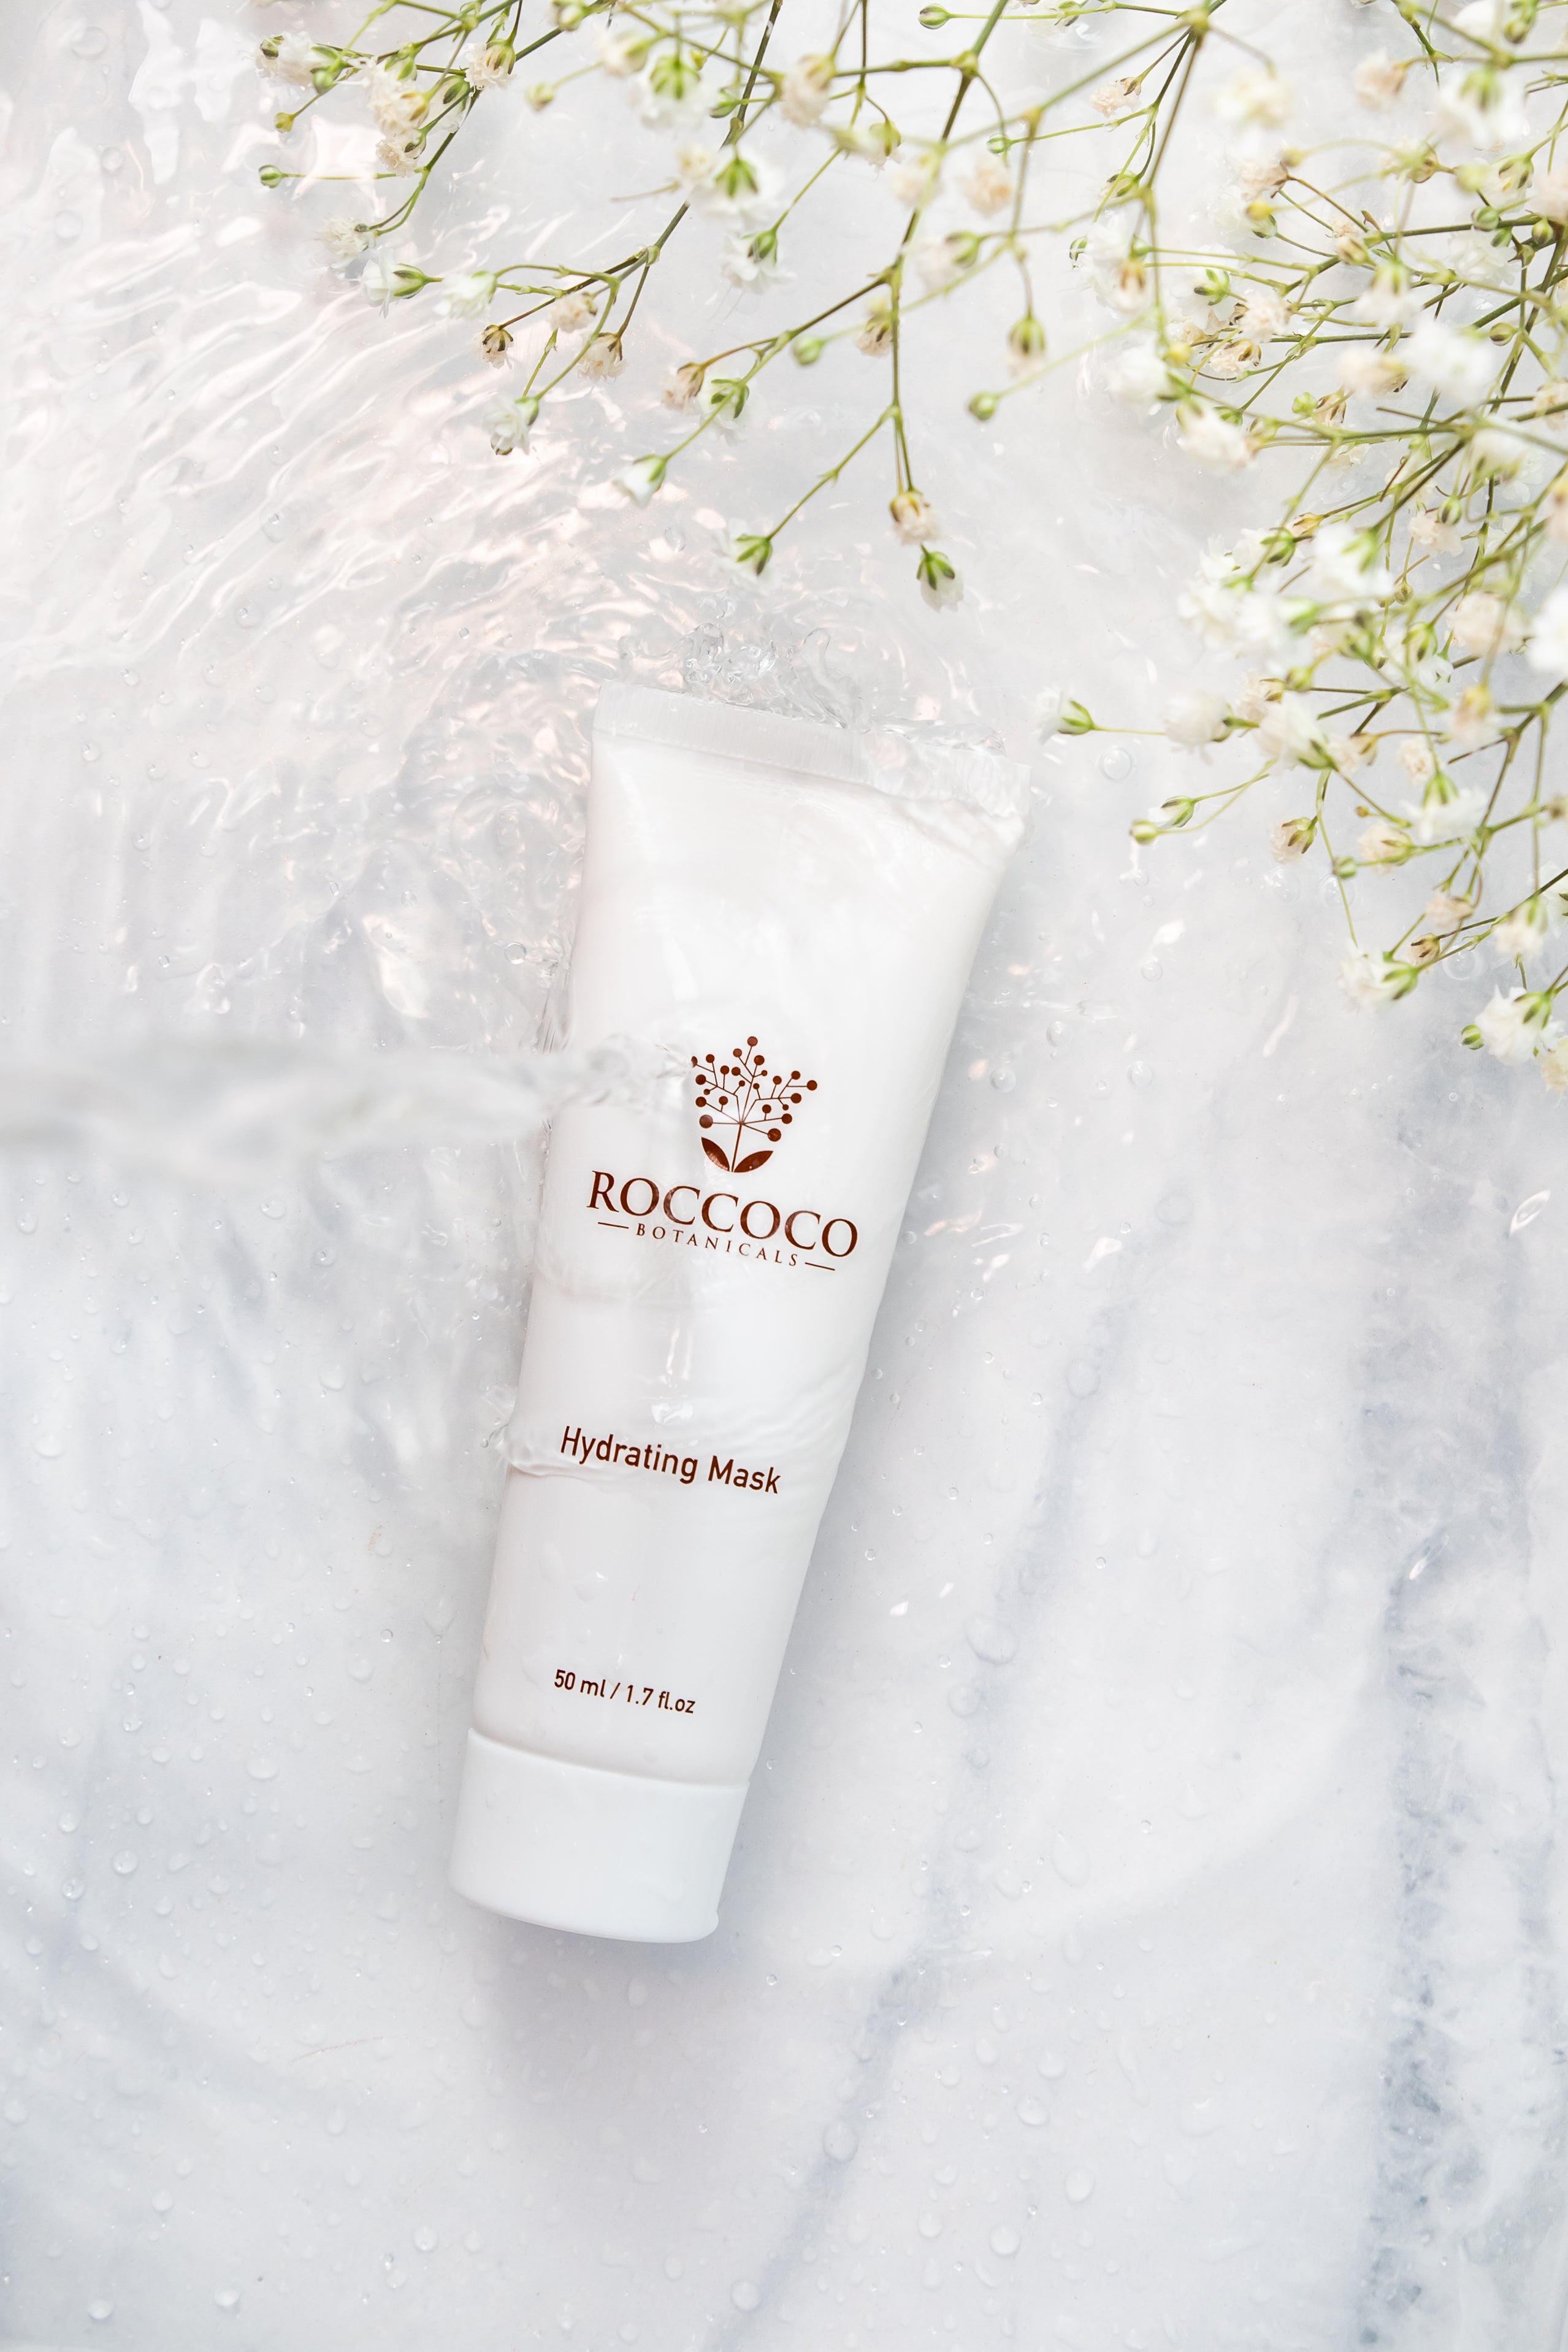 Roccoco Botanicals Hydrating Mask - Click to Buy!